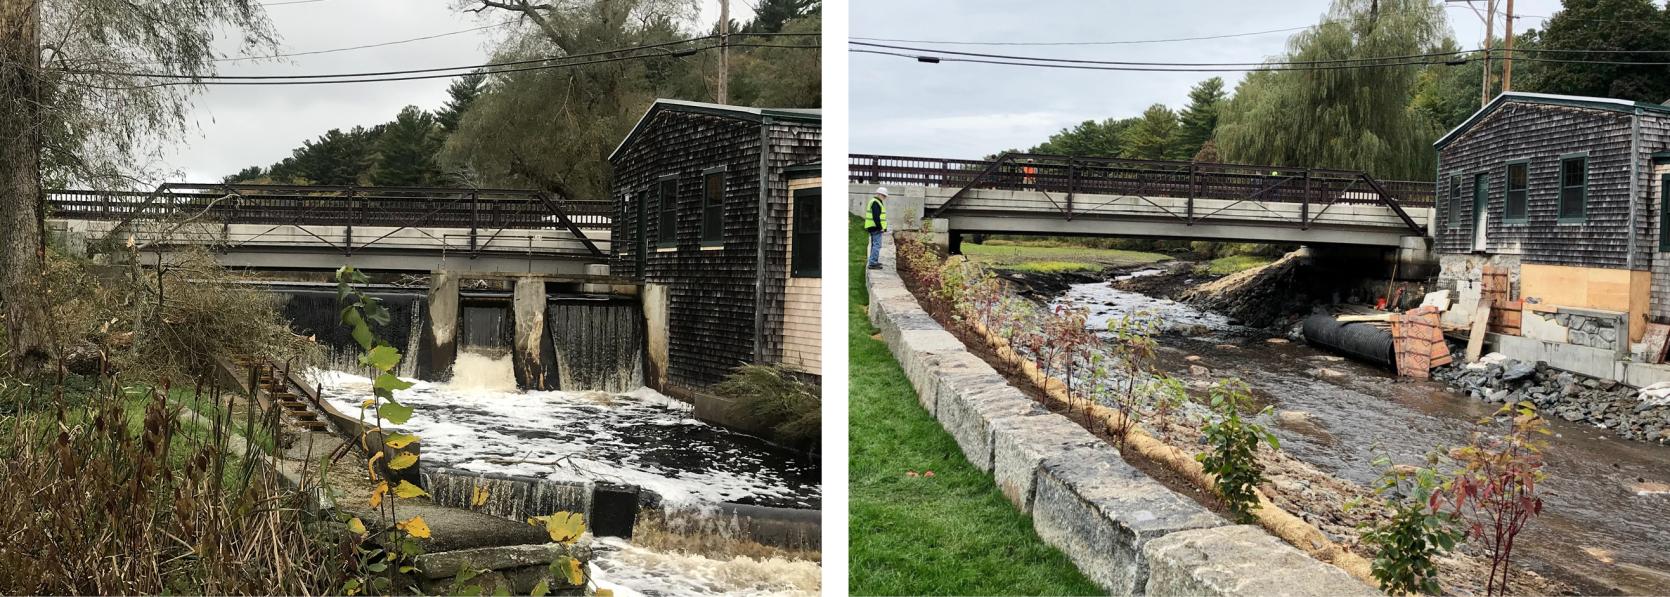 Jones River before and after removal of the Elm Street Dam.